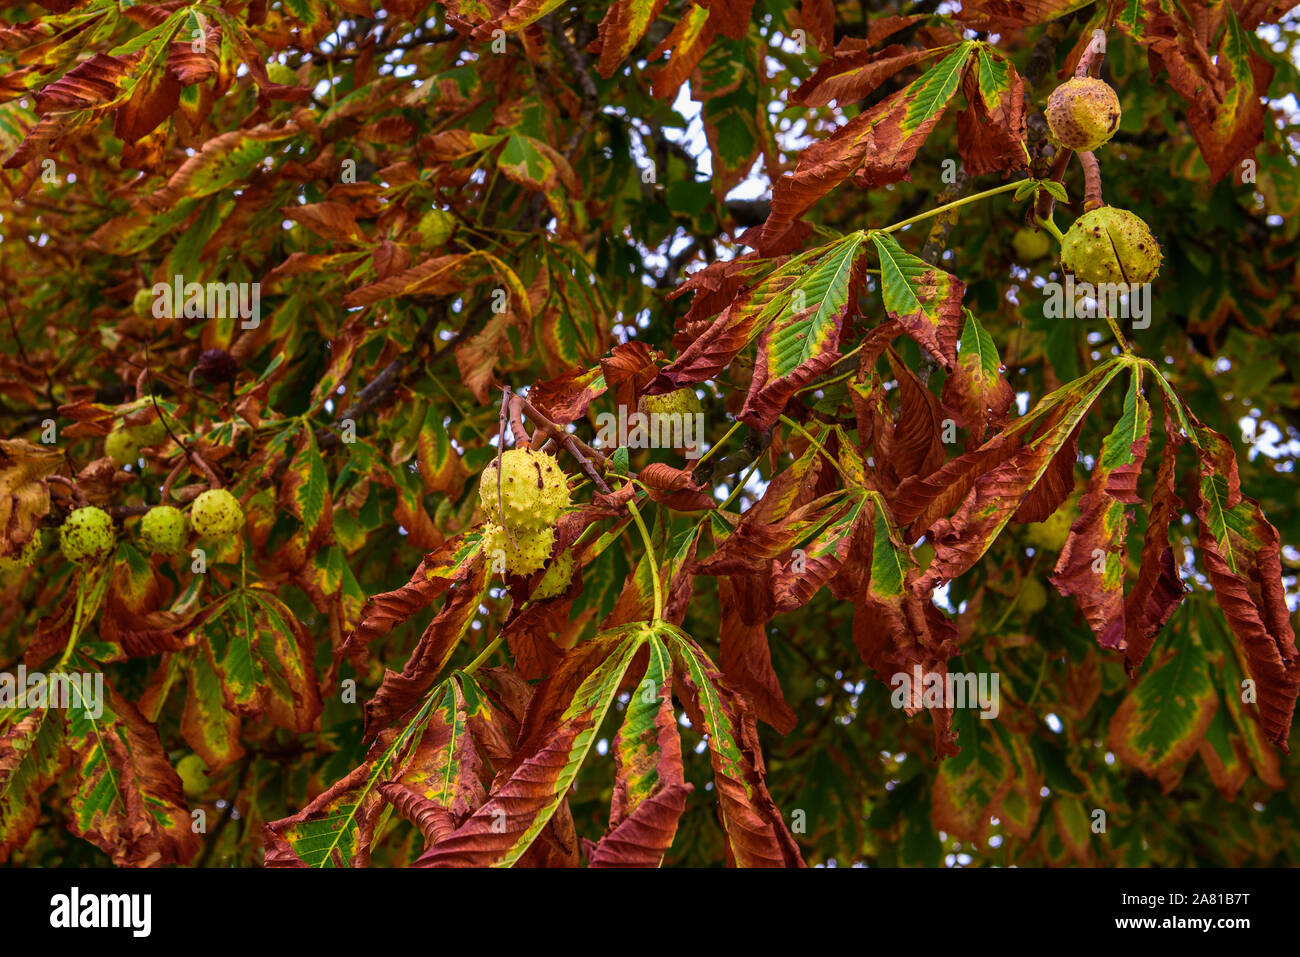 Chestnut in green shell on the tree. Red leaves of tree.  Tree is commonly known as horse-chestnut, or conker tree. Stock Photo